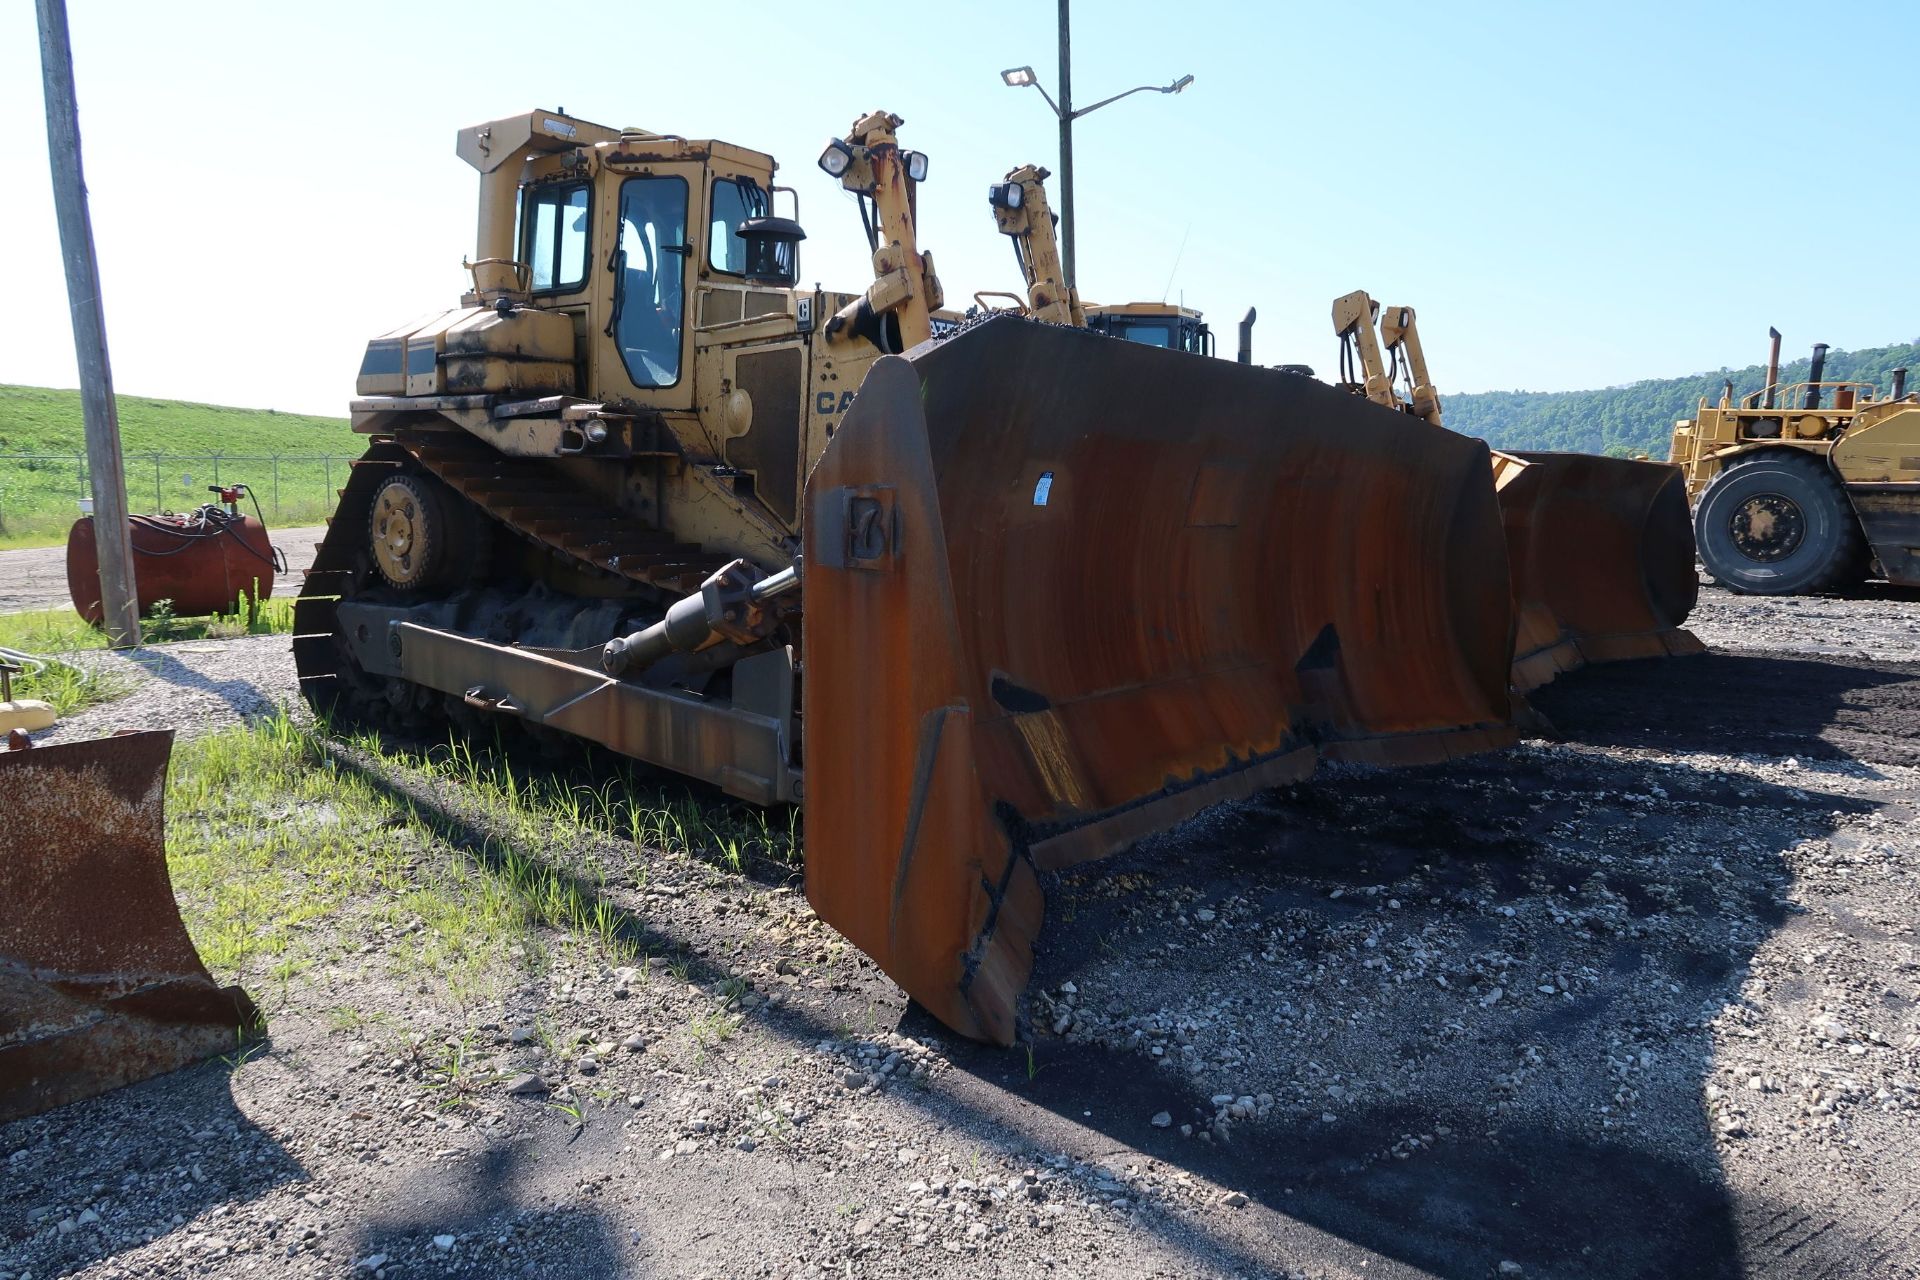 CATERPILLAR MODEL D9N CRAWLER DOZER; S/N 1JD02281, ROPS CANOPY, CAB, 26,102 HOURS SHOWING, NOTED